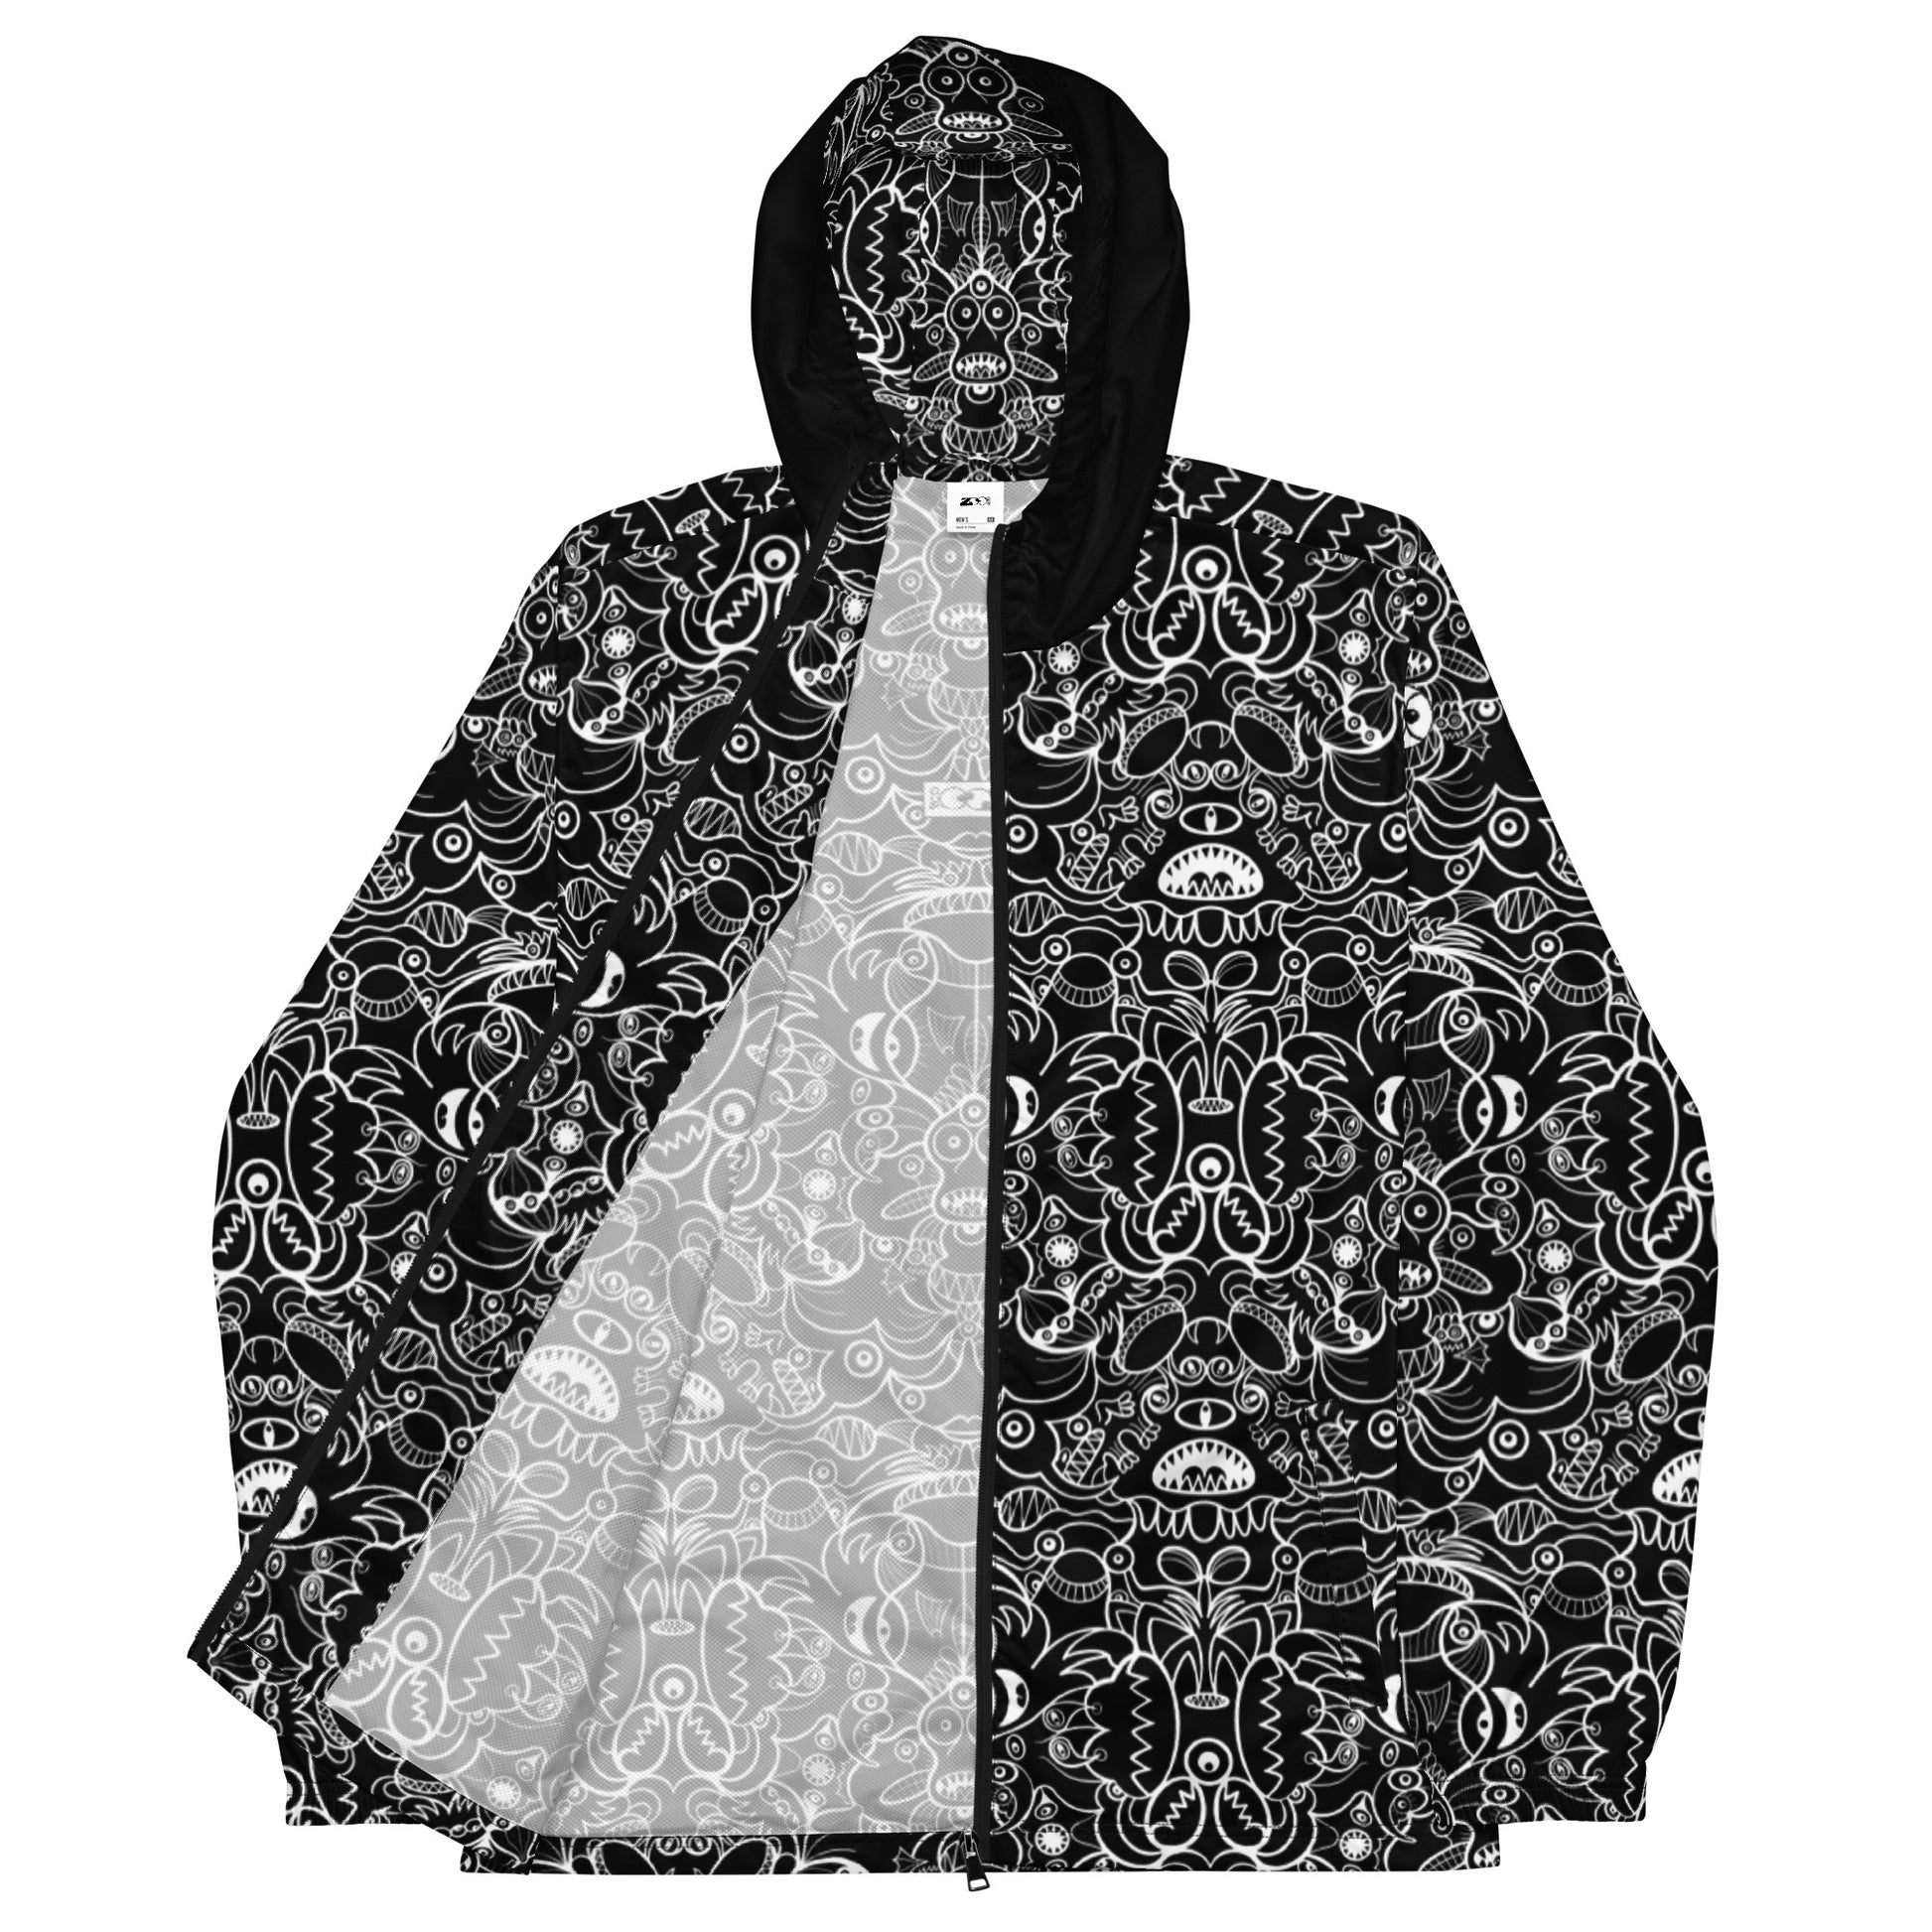 The powerful dark side of the Doodle world Men’s windbreaker. Product details